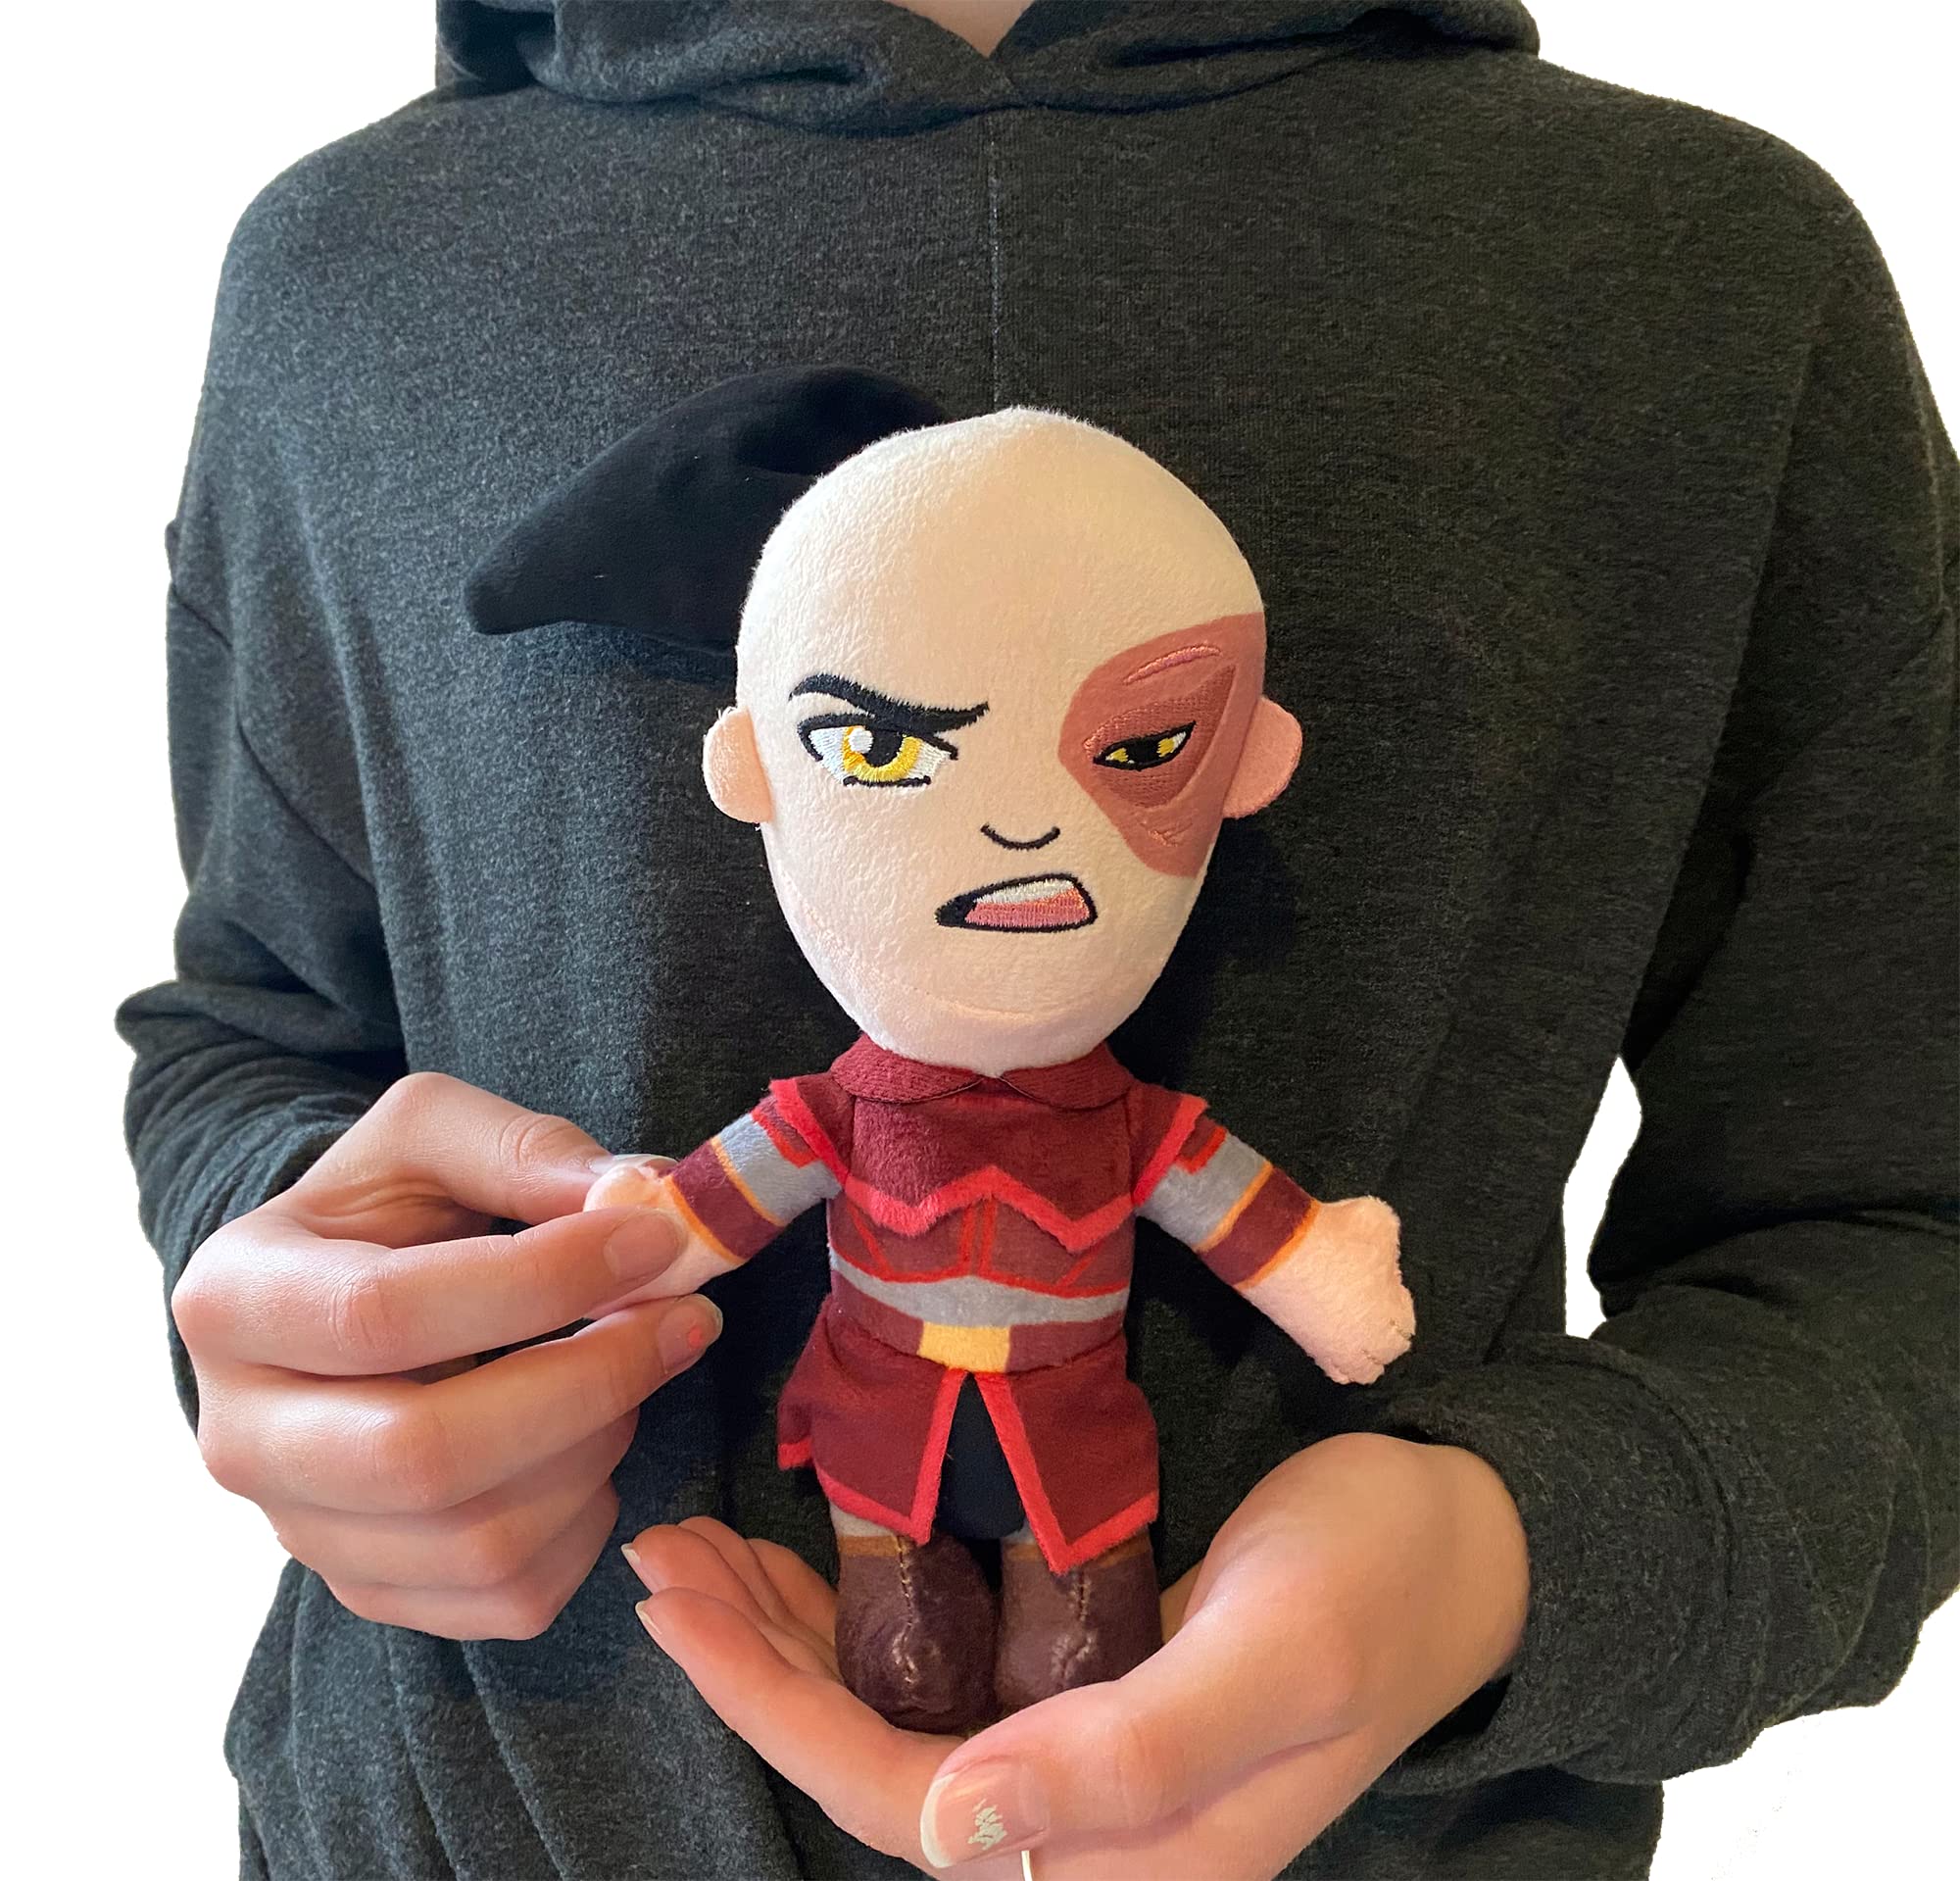 JINX Avatar: The Last Airbender Zuko Small Plush Toy, 7.5-in Stuffed Figure from Nickelodeon TV Series for Fans of All Ages